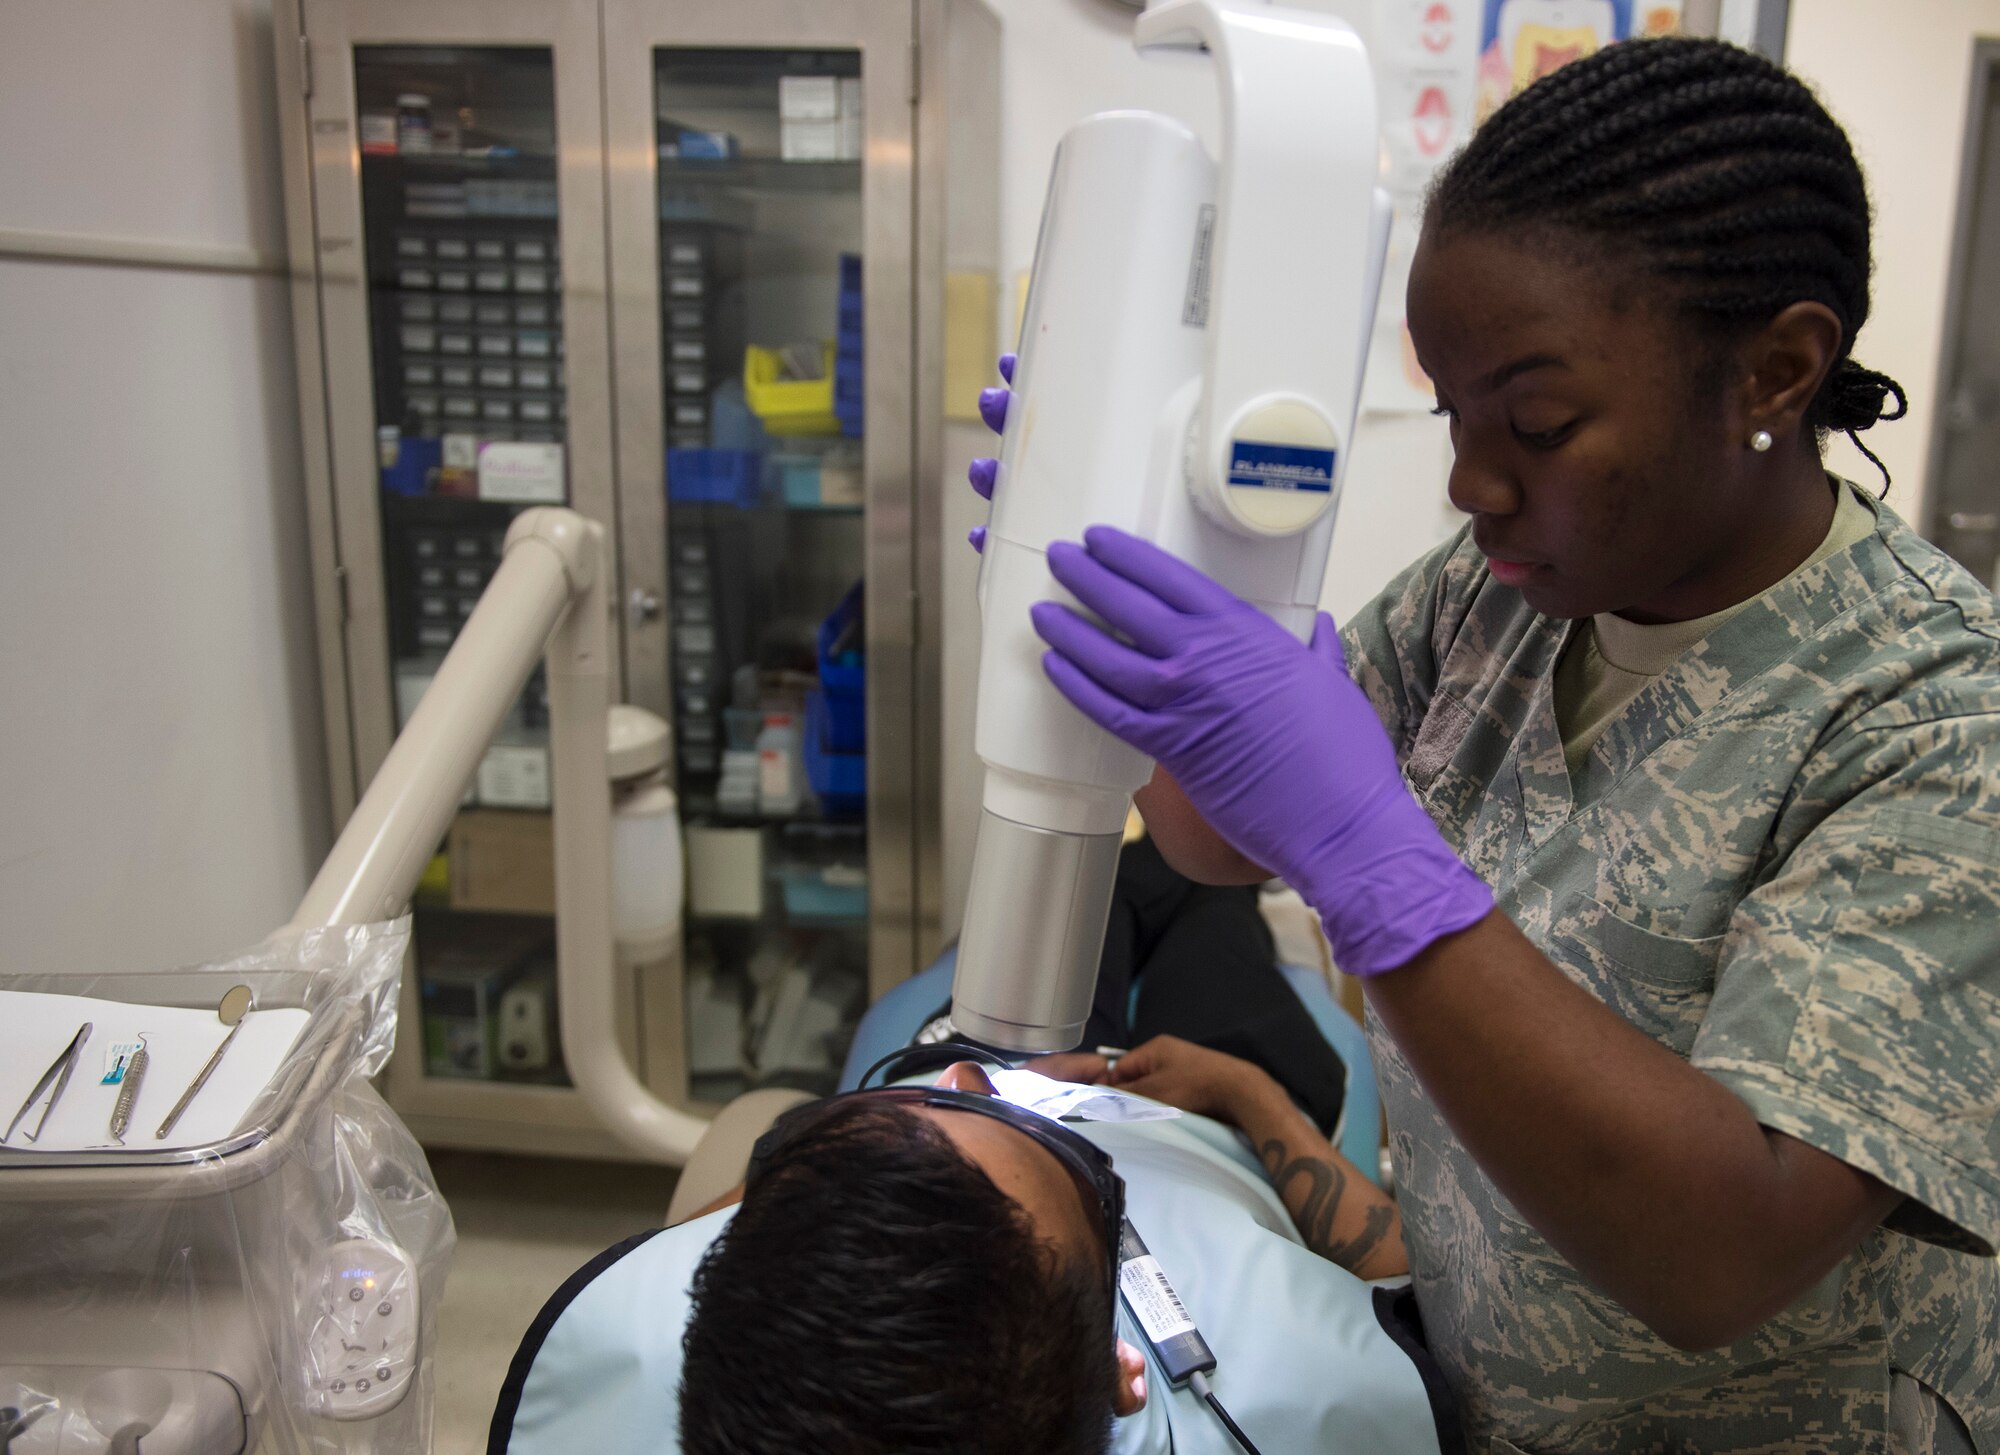 U.S. Air Force Senior Airman Breauna Robinson, a dental assistant with the 379th Expeditionary Medical Operations Squadron, prepares a patient for an x-ray at Al Udeid Air Base, Qatar, May 15, 2017. Airmen assigned to the dental section provide a wide range of services to include examinations, diagnosis and basic treatments of problems relating to the tooth or the mouth. (U.S. Air Force photo by Tech. Sgt. Amy M. Lovgren)